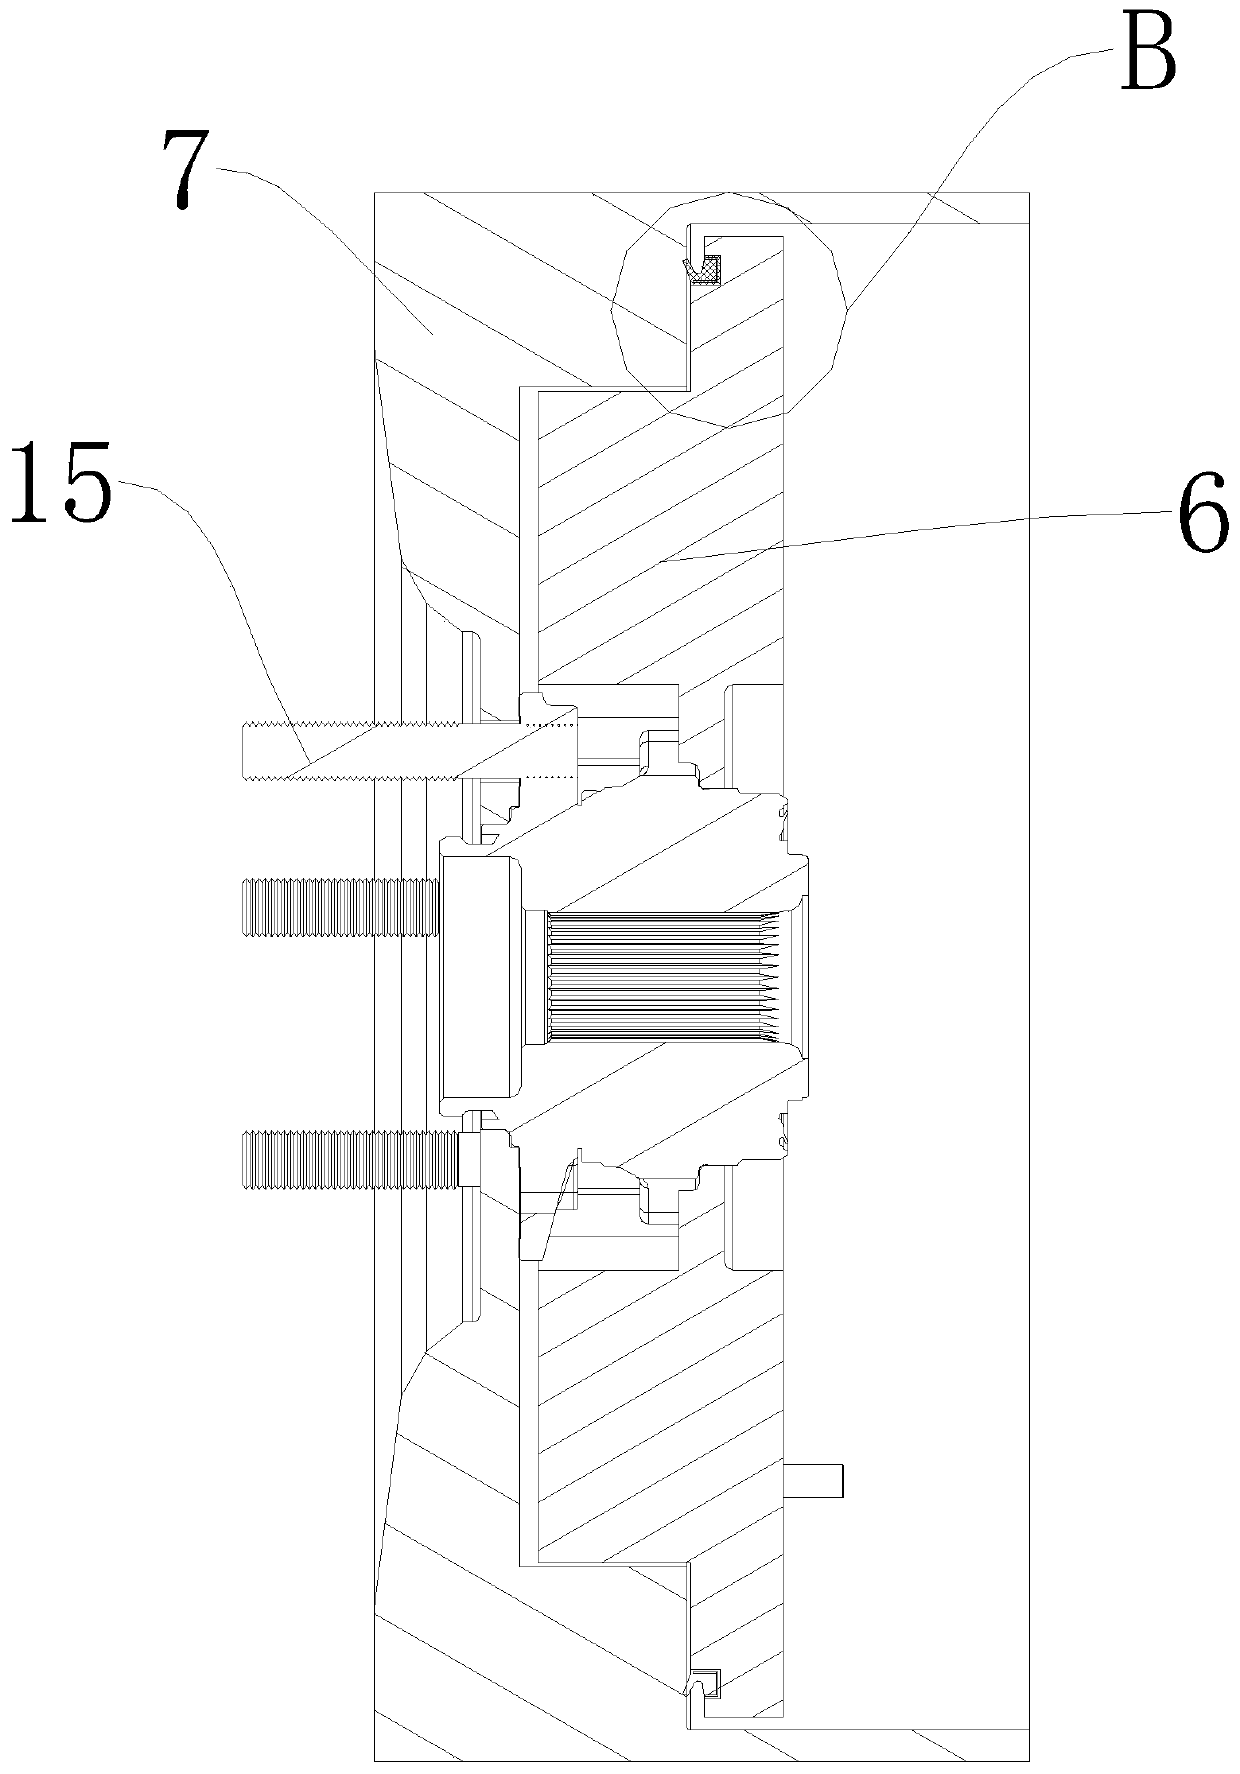 End face sealing structure for motor and stator of hub motor